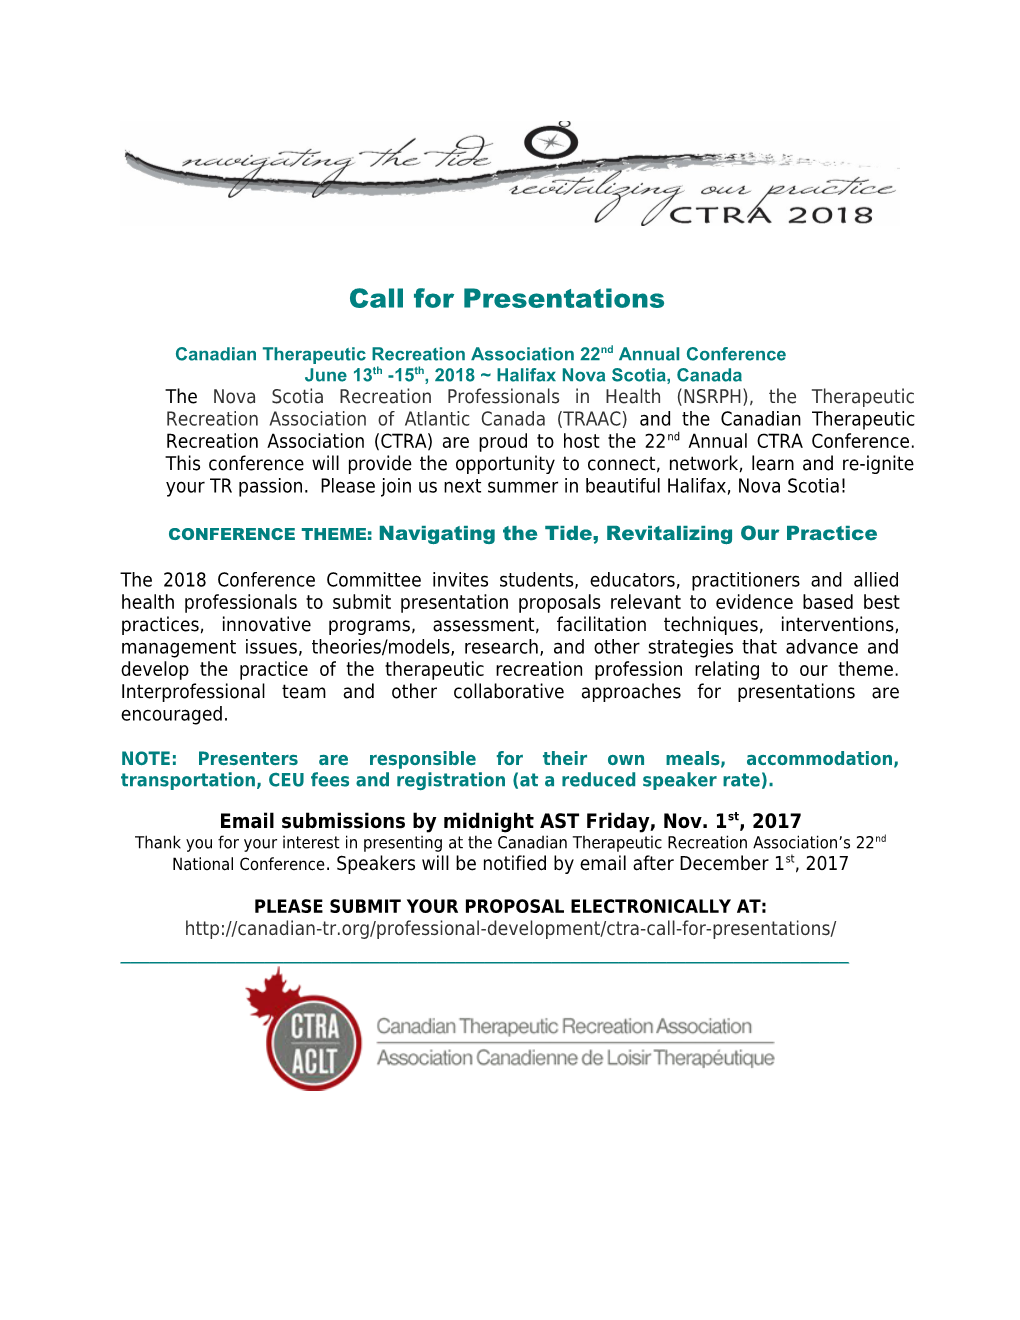 Canadian Therapeutic Recreation Association 22Nd Annual Conference